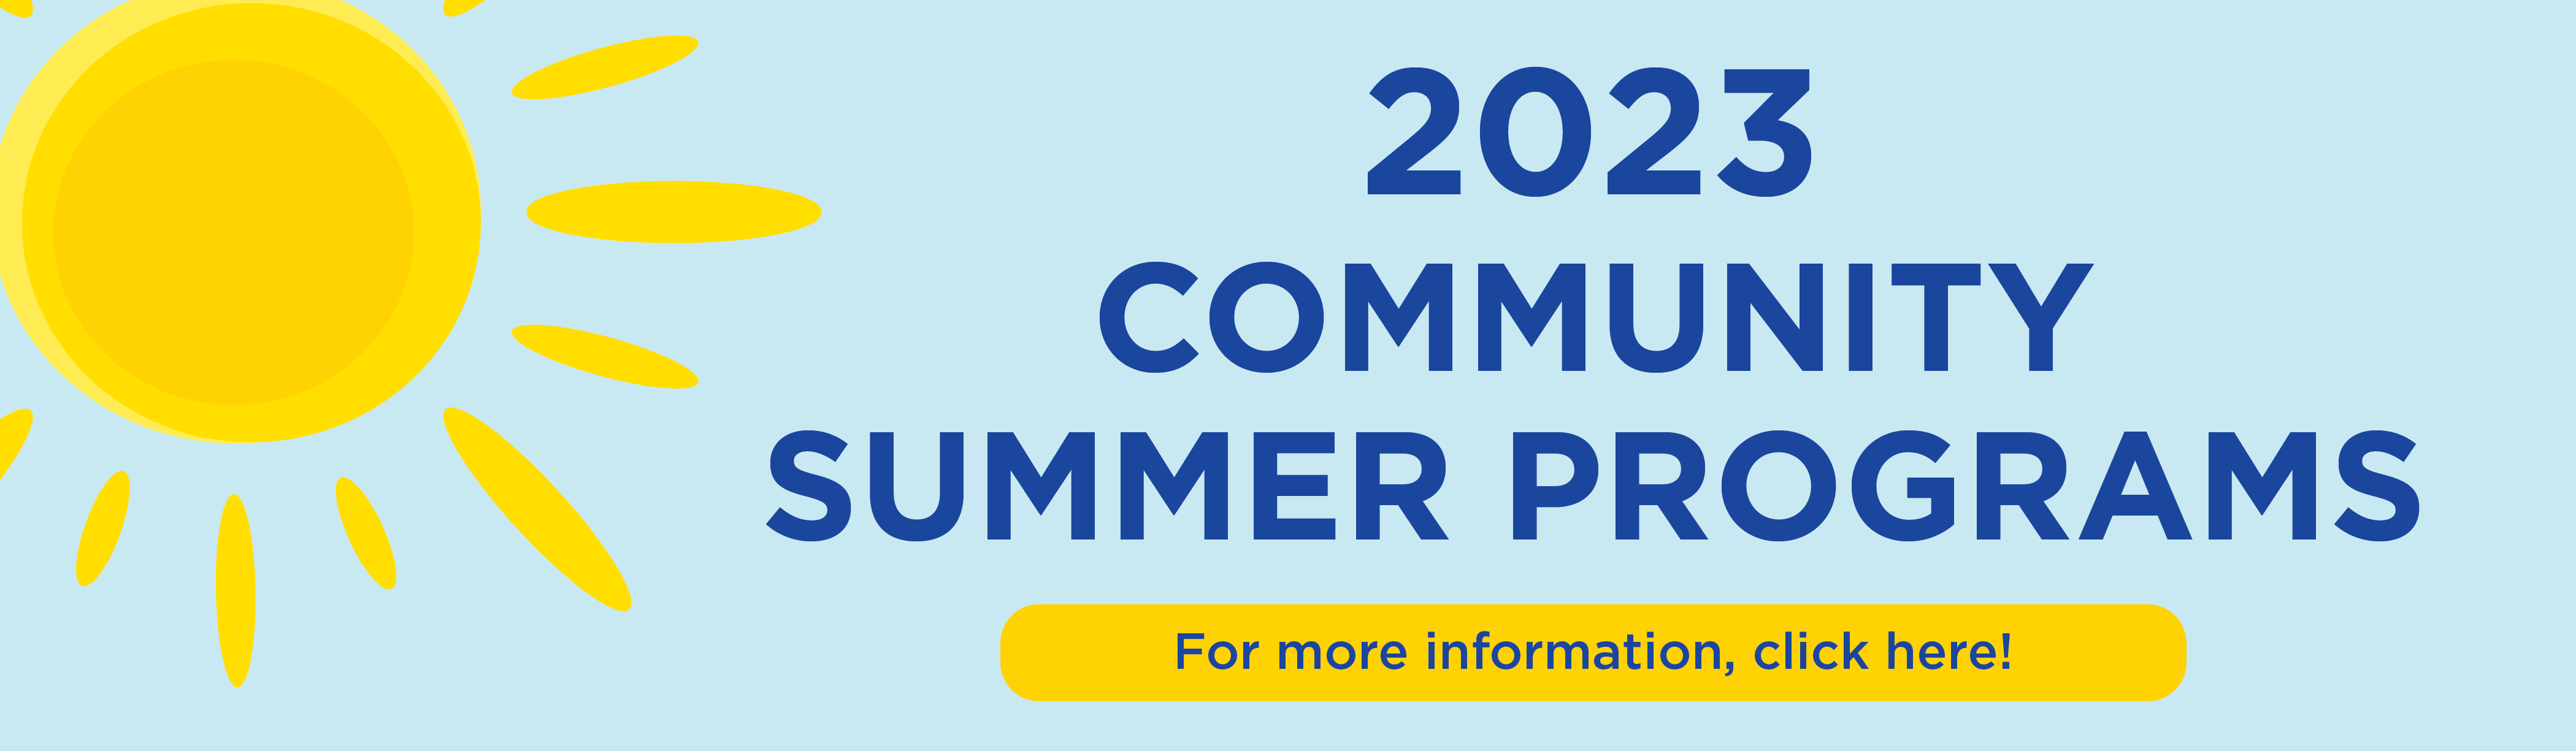 2023 Community Summer Programs! Click here for more information